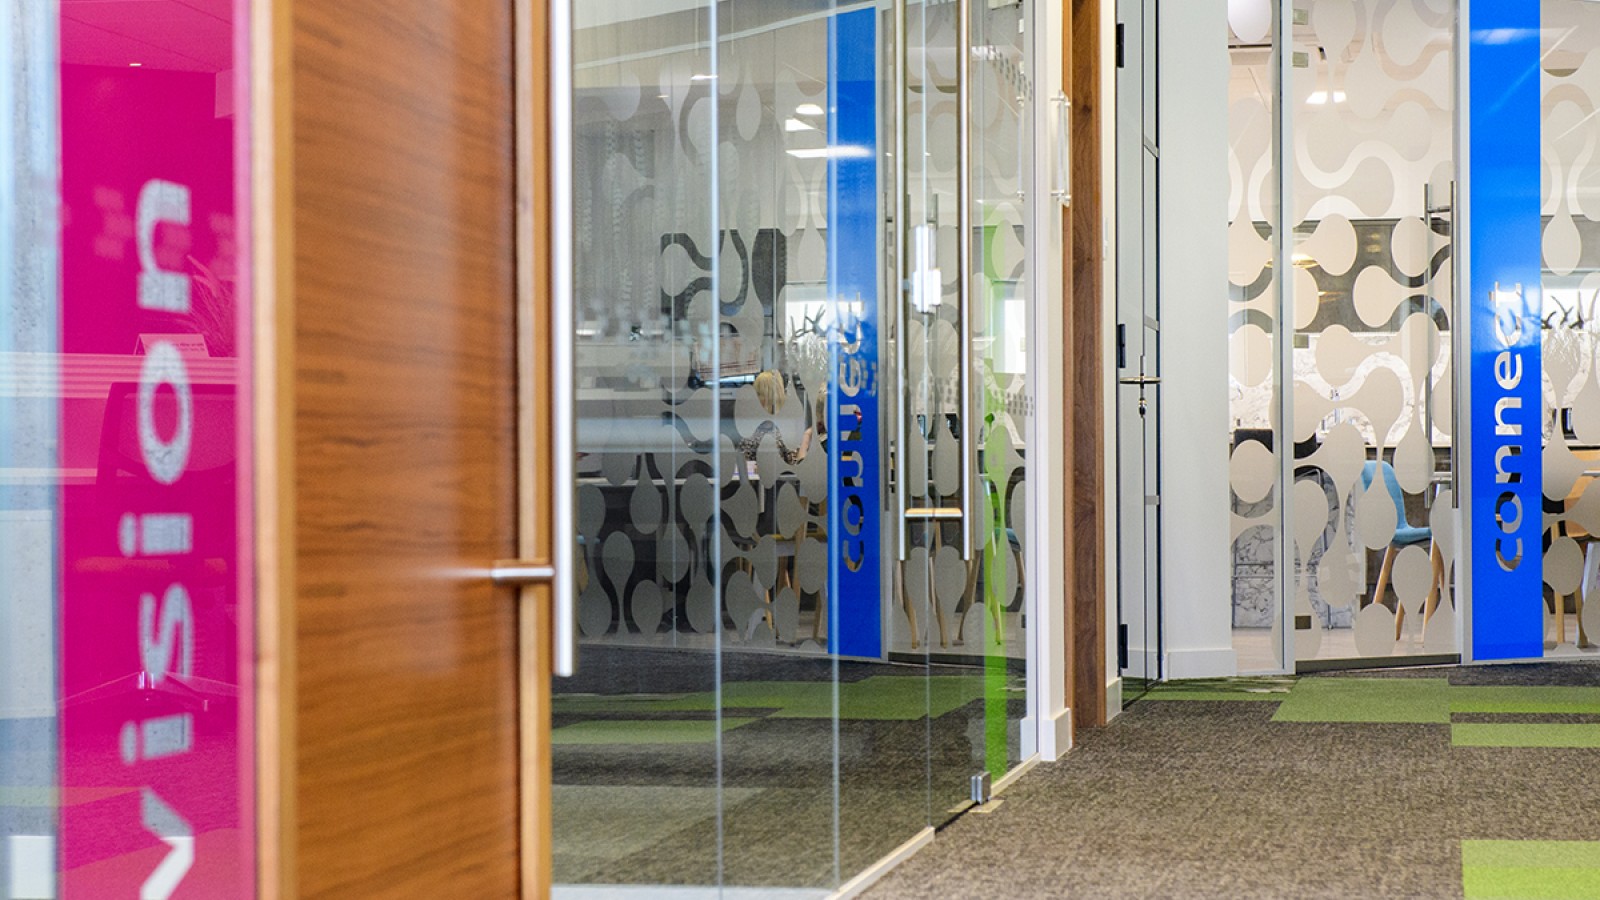 The interior of a newly refurbished office, with glass walls and doors, grey and green carpet and green and blue signage